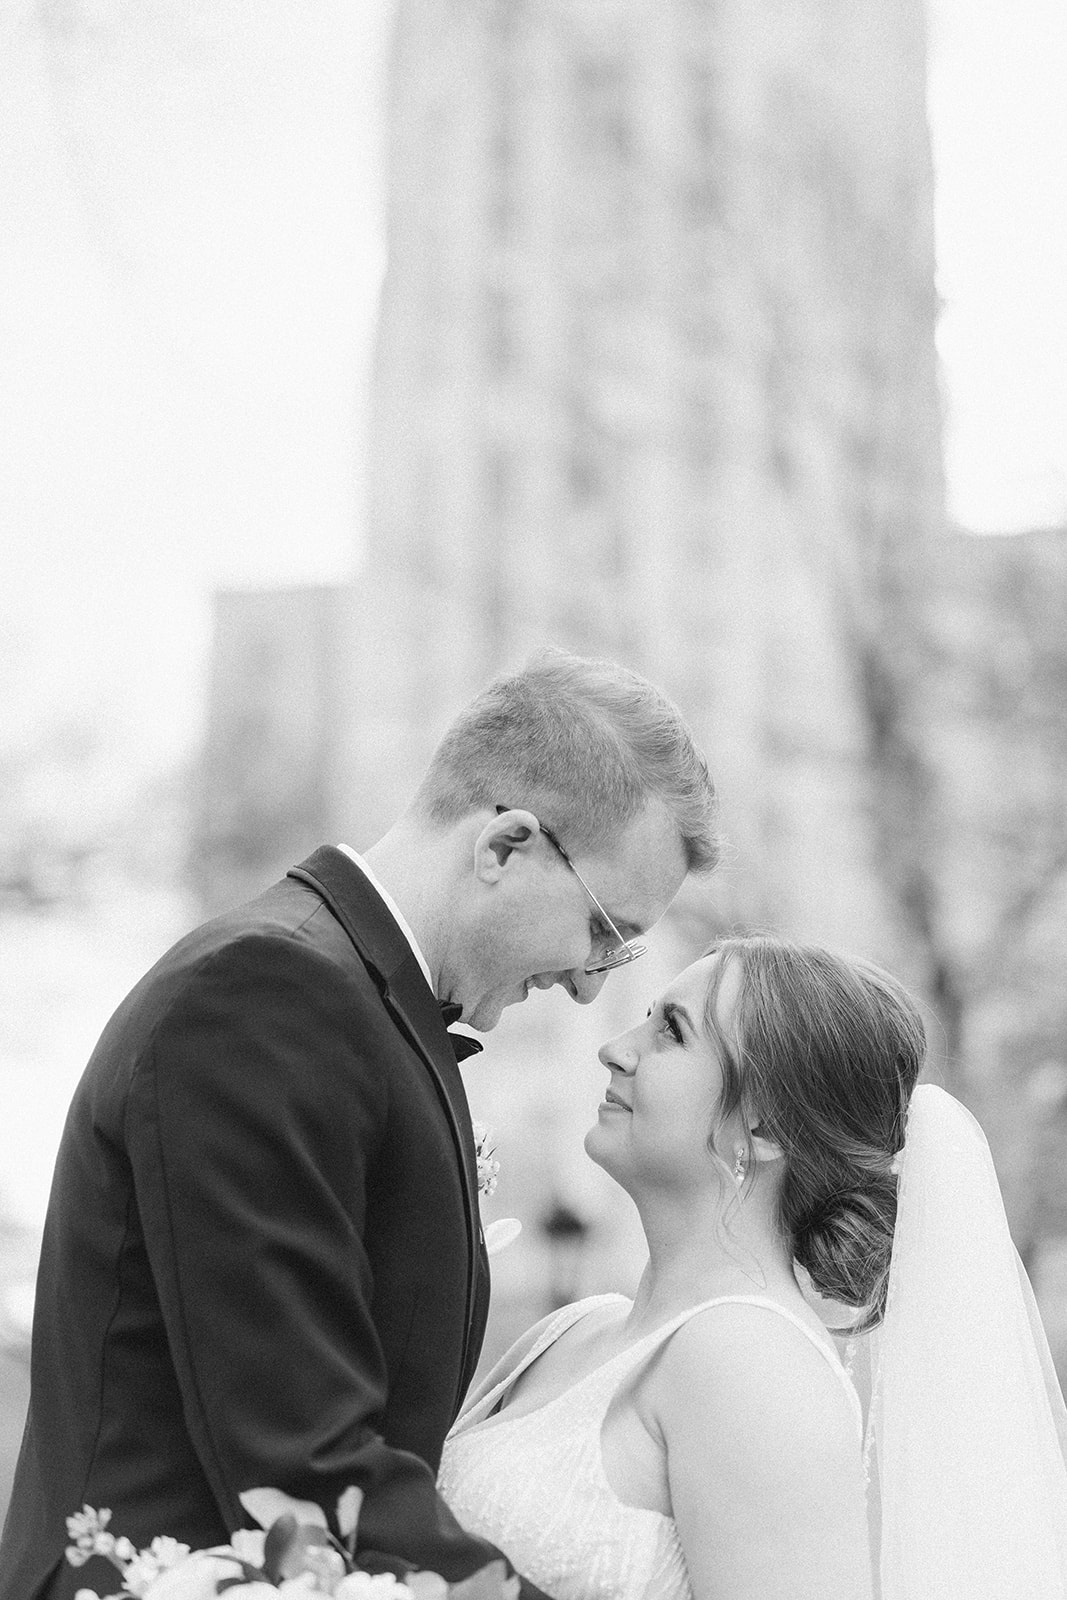 A couple wedding in Embassy Suites Pittsburgh Downtown, captured in authentic, documentary-style photography. 